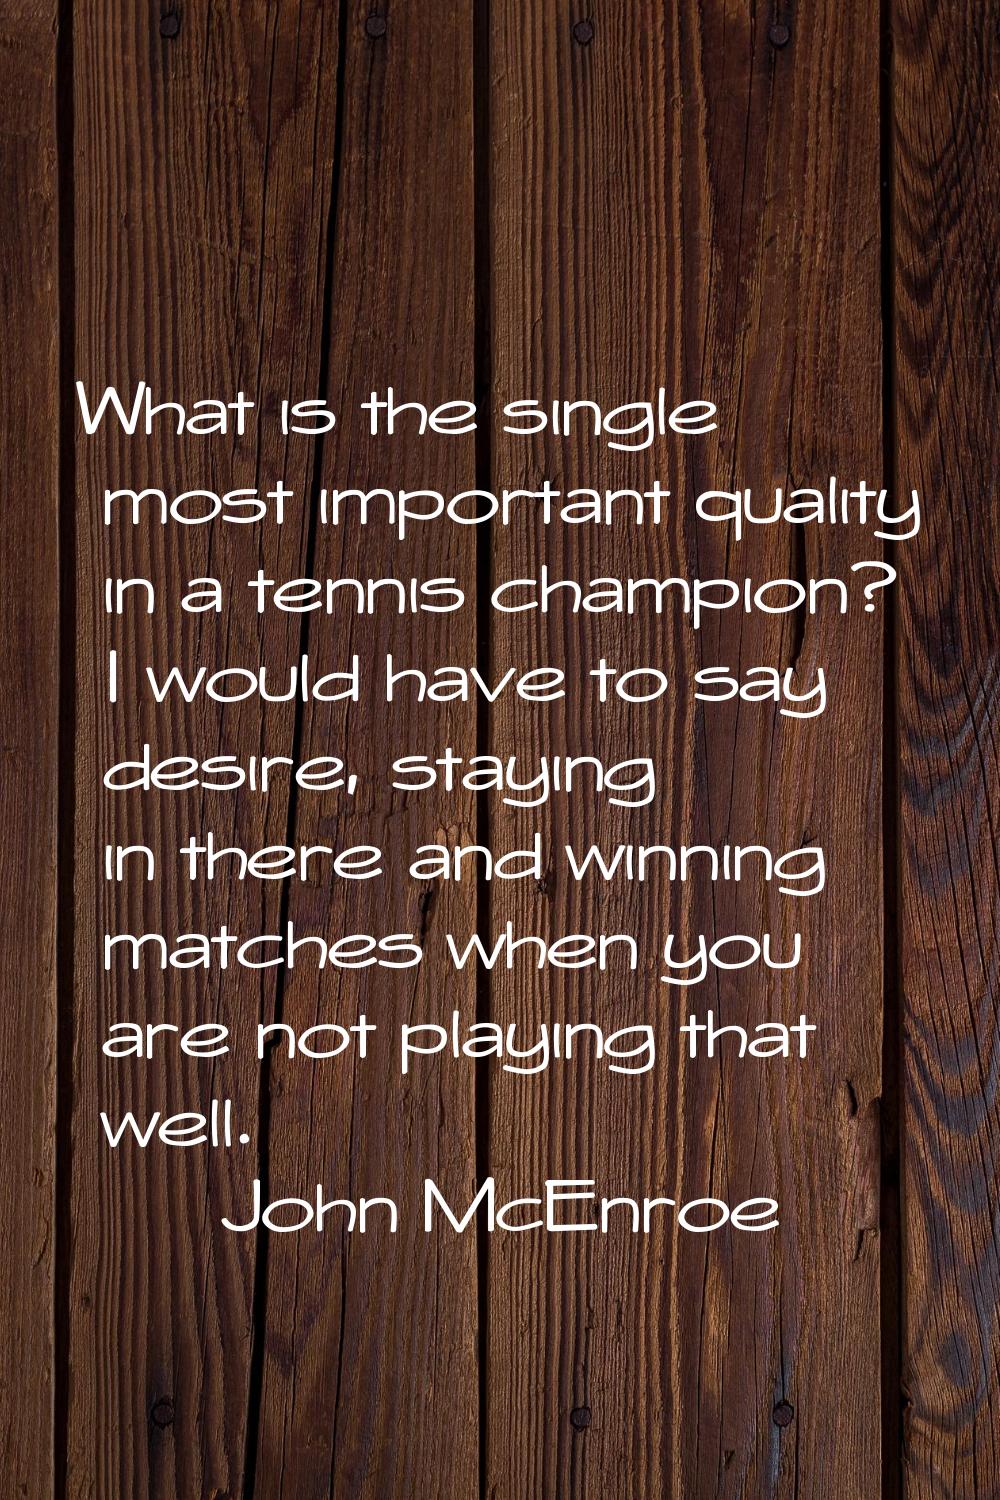 What is the single most important quality in a tennis champion? I would have to say desire, staying